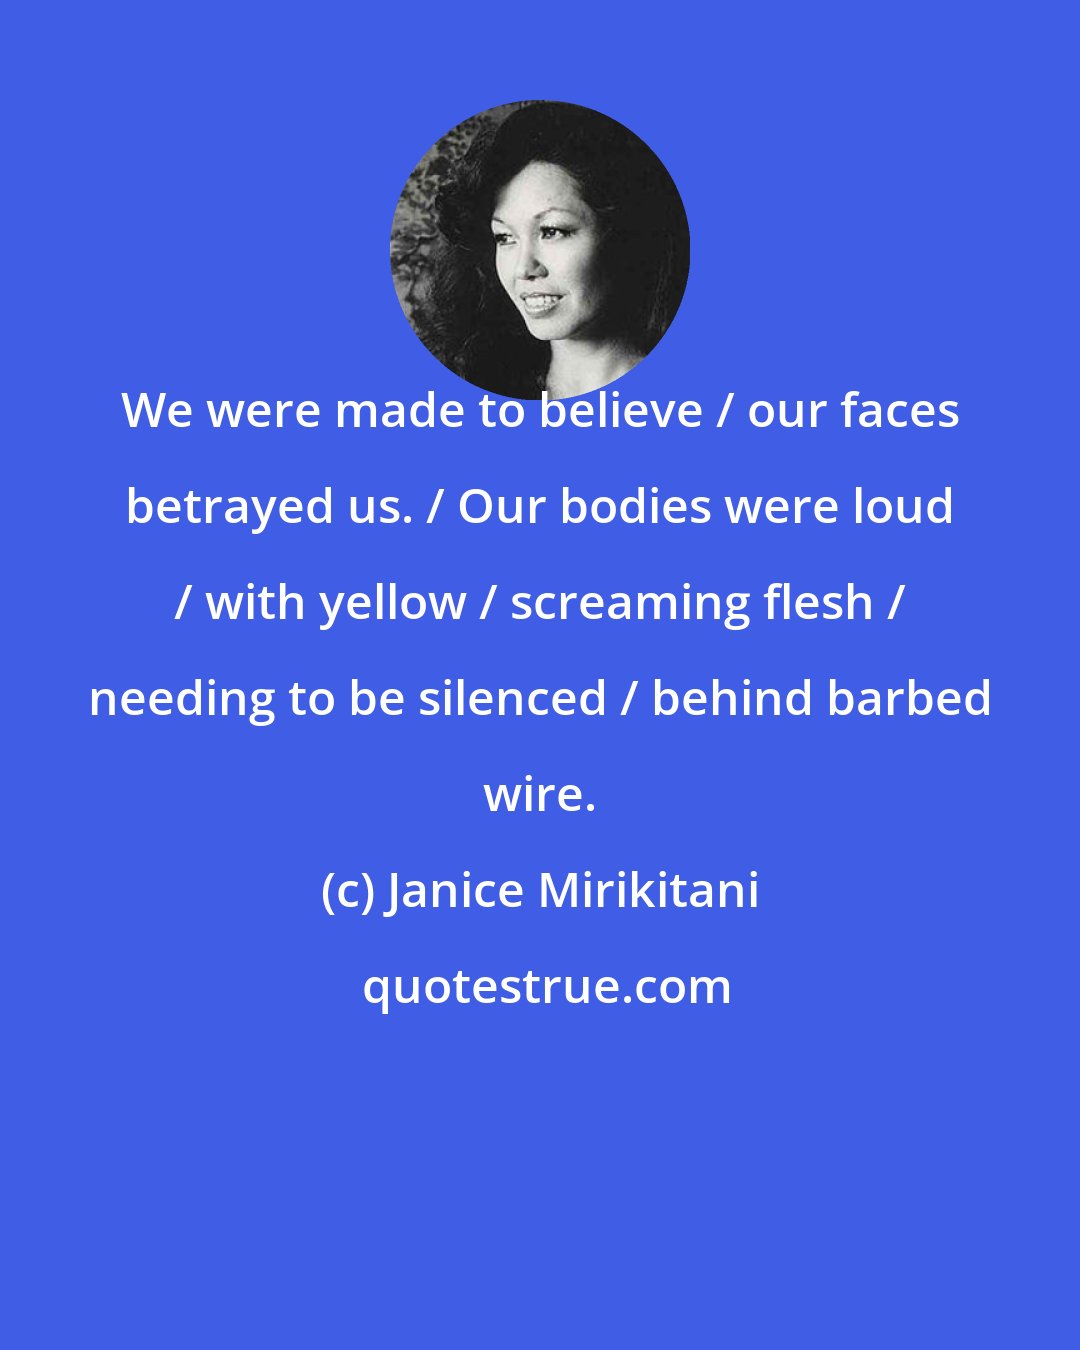 Janice Mirikitani: We were made to believe / our faces betrayed us. / Our bodies were loud / with yellow / screaming flesh / needing to be silenced / behind barbed wire.